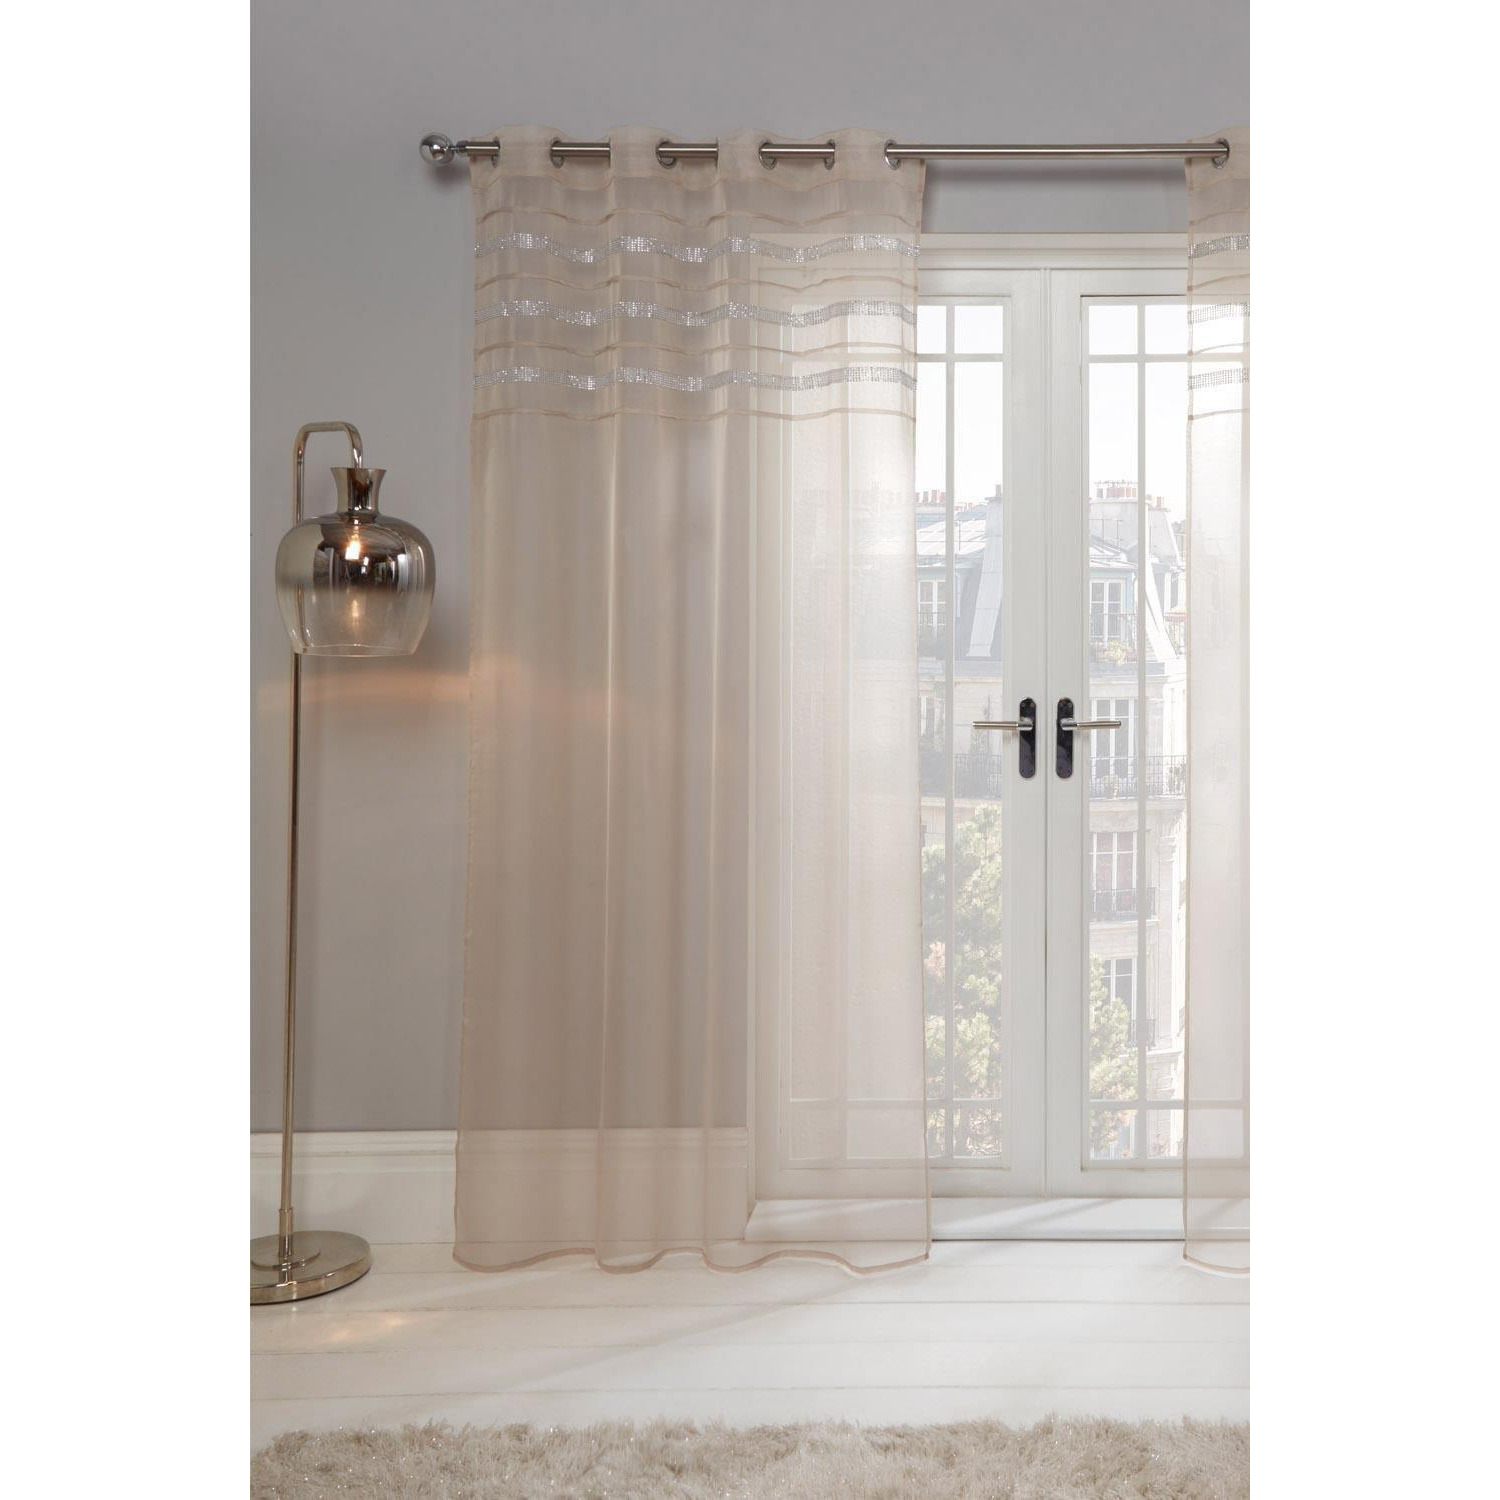 Pair of Diamante Voile Eyelet Net Curtains